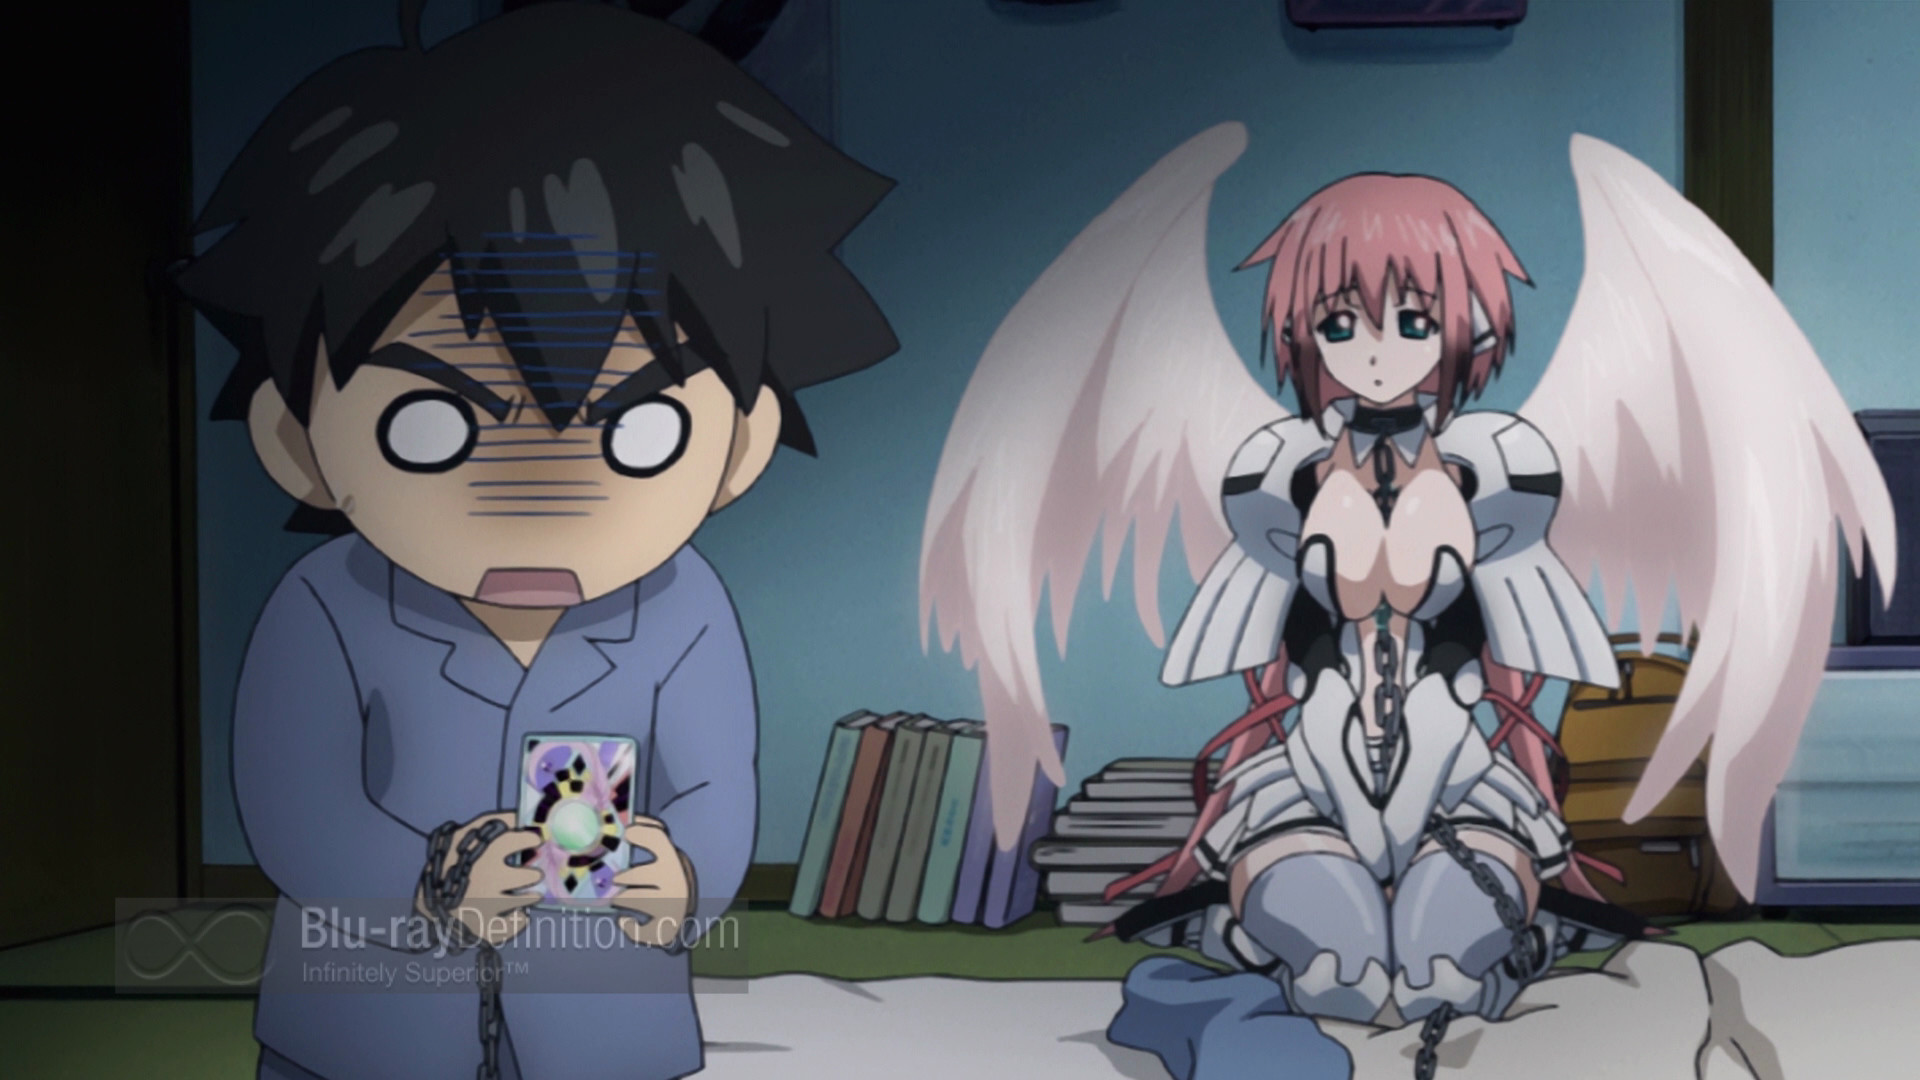 1920x1080 Heaven's Lost Property: The Complete Series Blu-ray Review